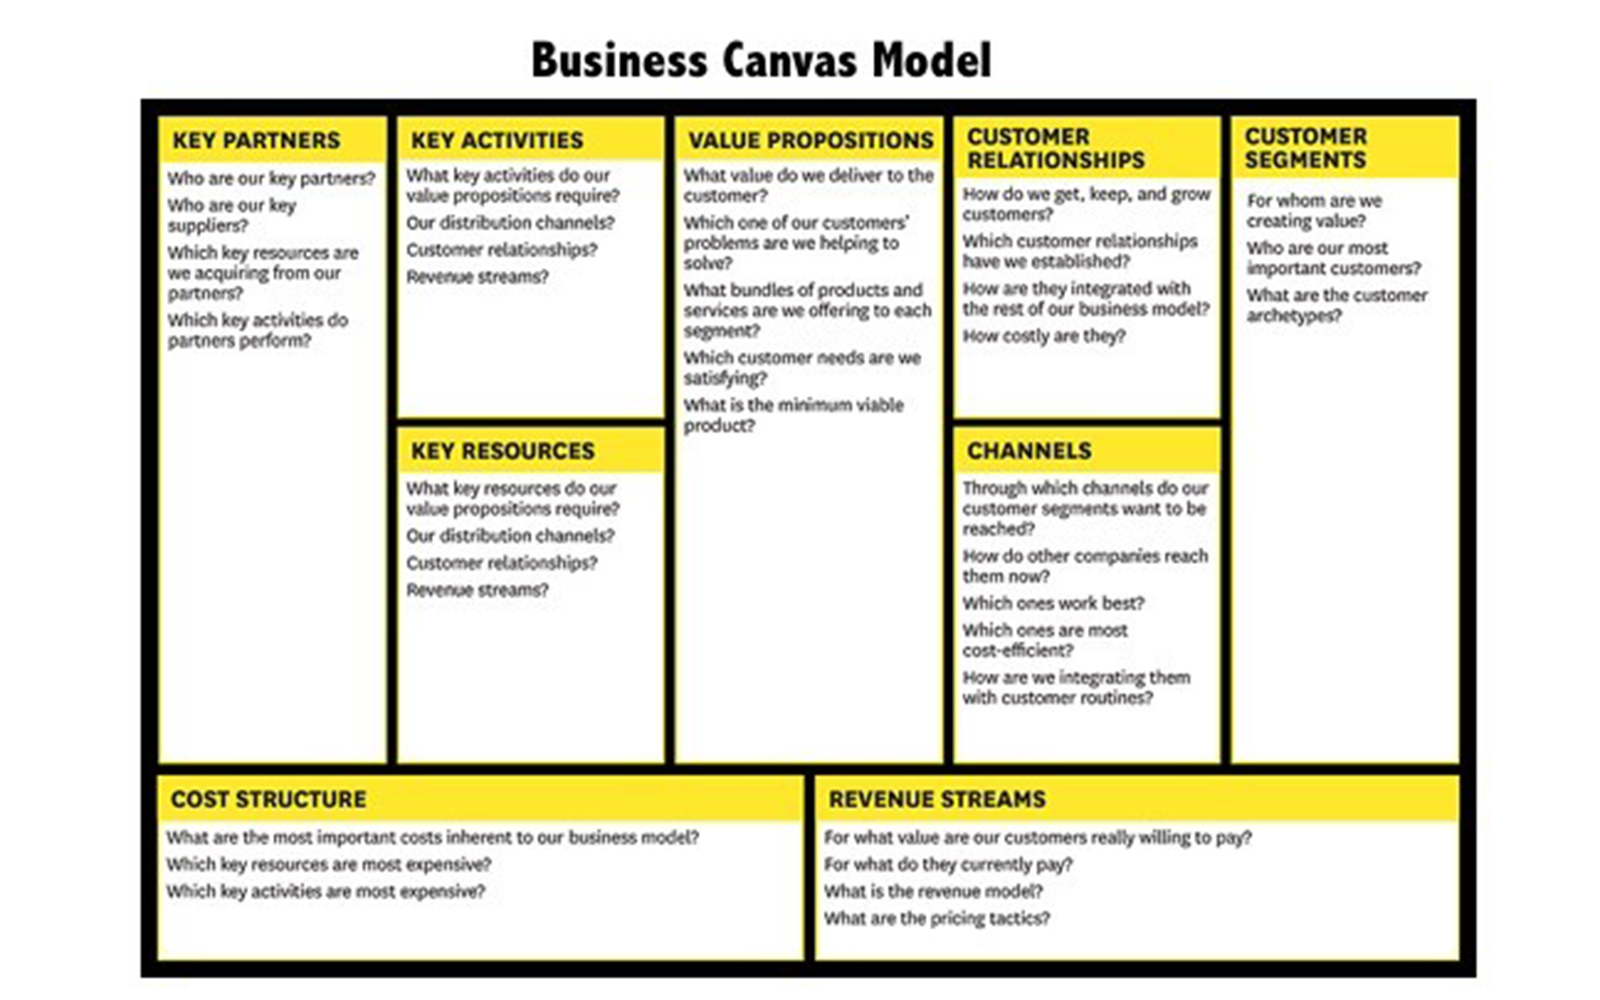 The Business Canvas Model